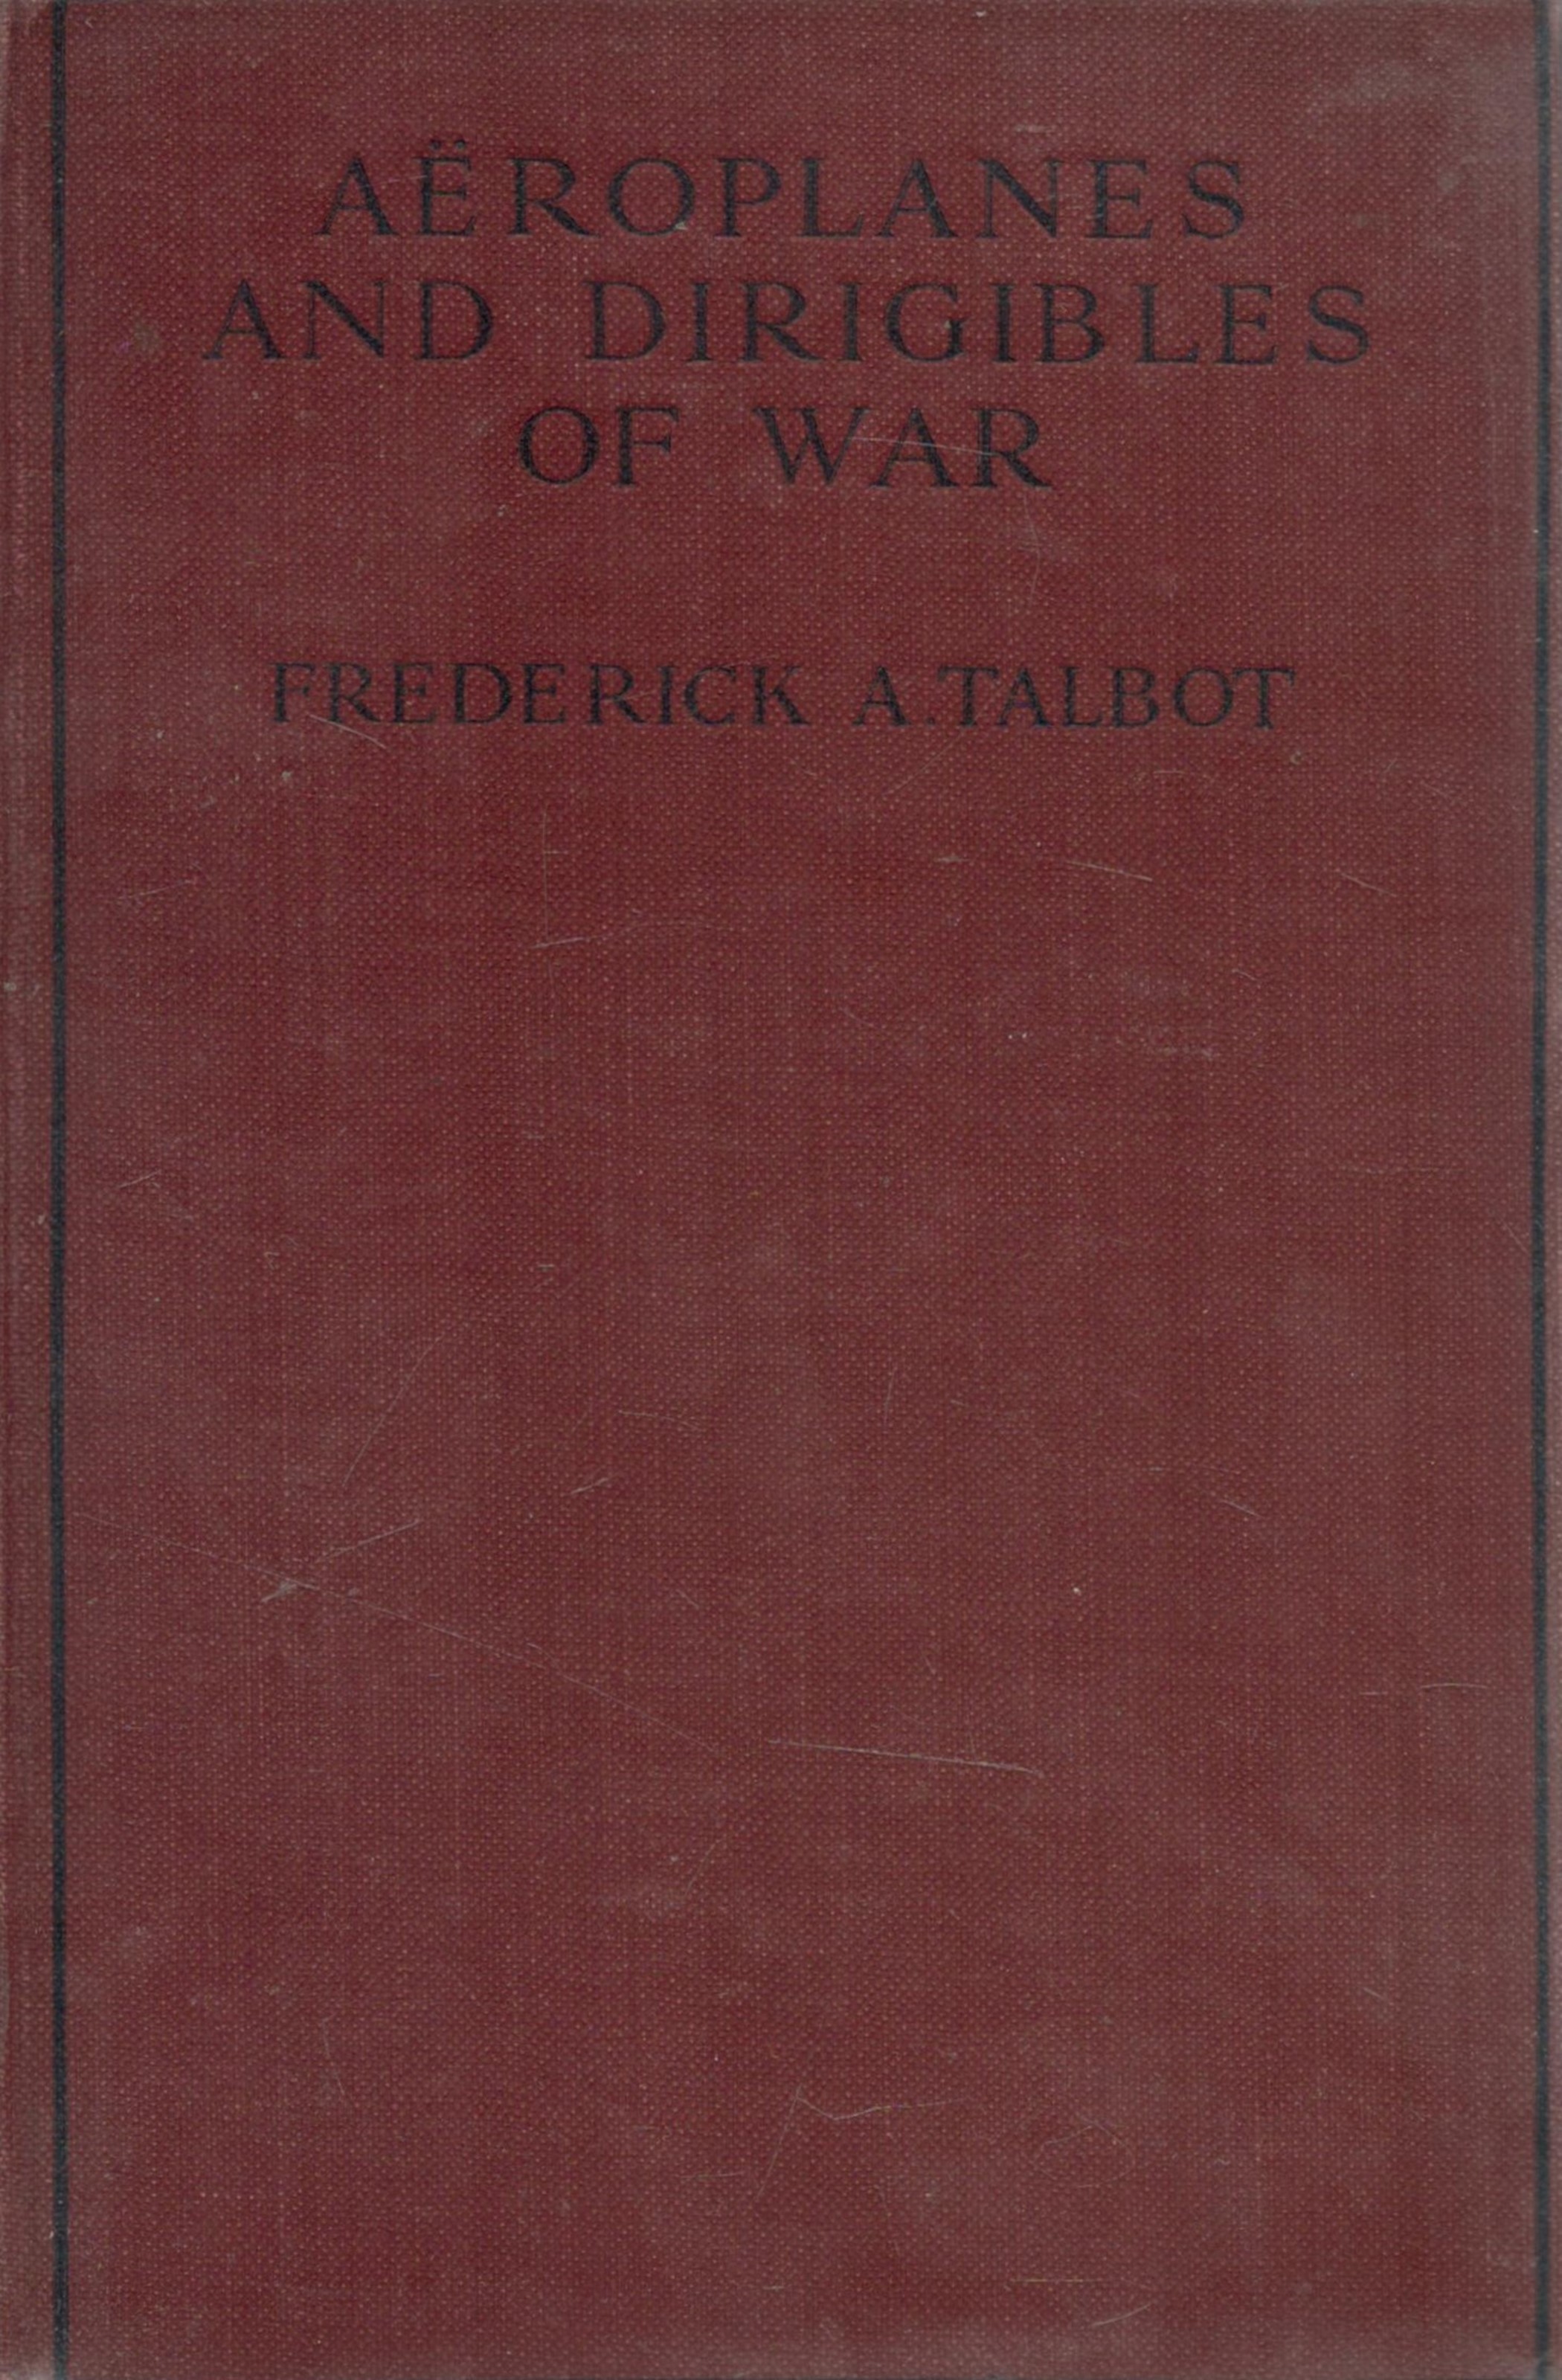 Aeroplanes and Dirigibles of War by Frederick A Talbot 1915 First Edition Hardback Book with 283